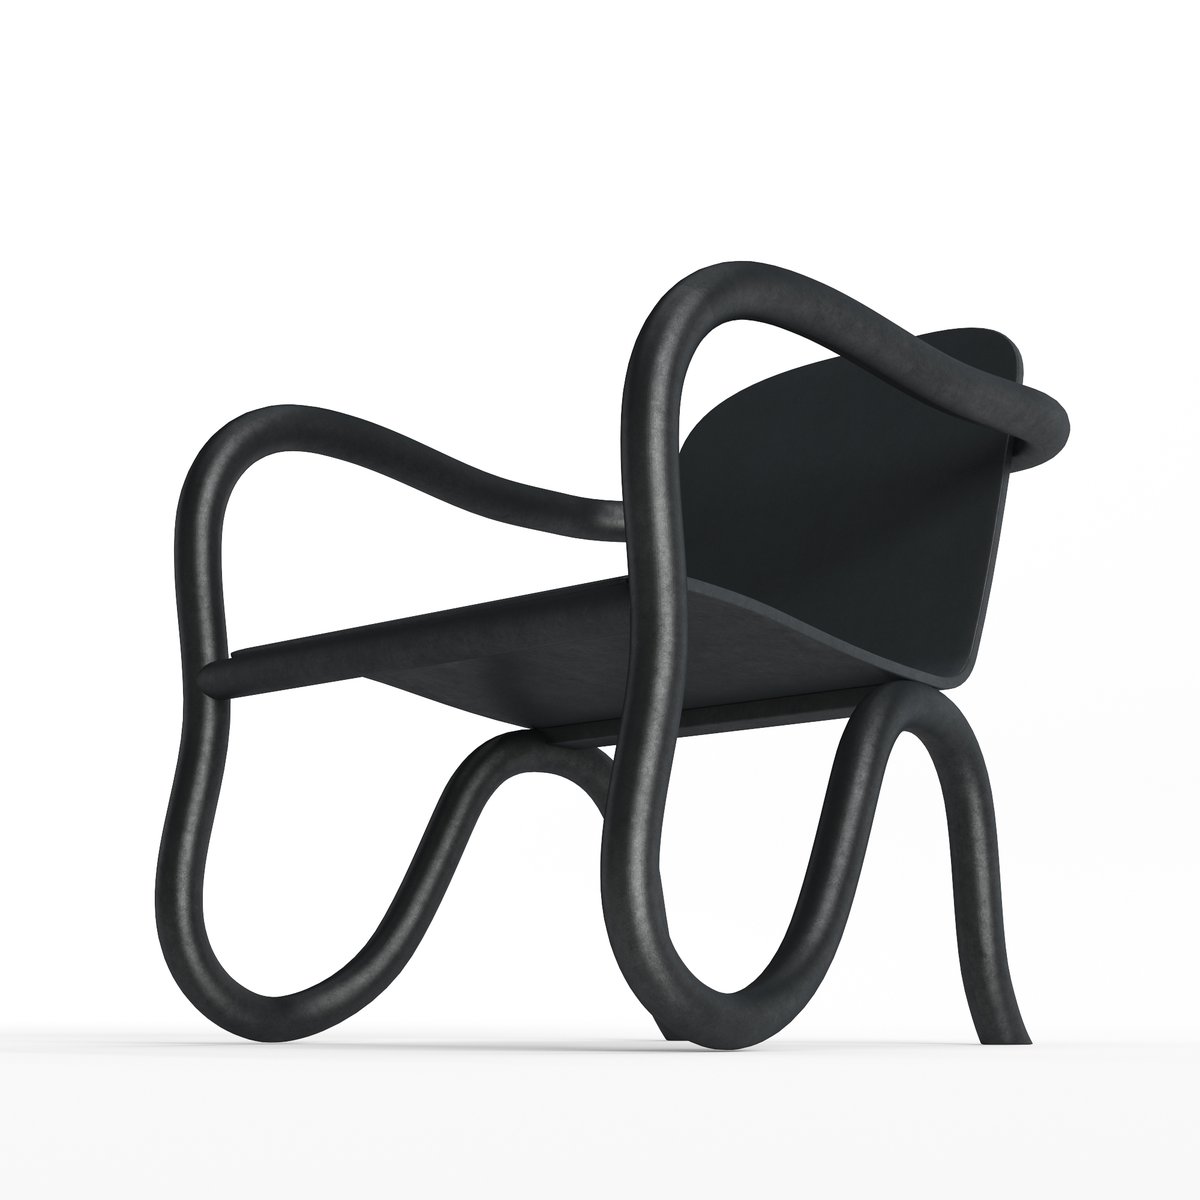 Kolho Lounge Chair 3d model Dimensions: 70 x 72 H 77 cm Files: 3ds max v-ray and corona (2018-2020), . 3 d s , .dwg, .fbx, .obj turbosquid.com/3d-models/3d-k… #chair #stool #furniture #interior #restaurant #dining #contemporary #staging #design #3d #cgi #render #edvace #visualization